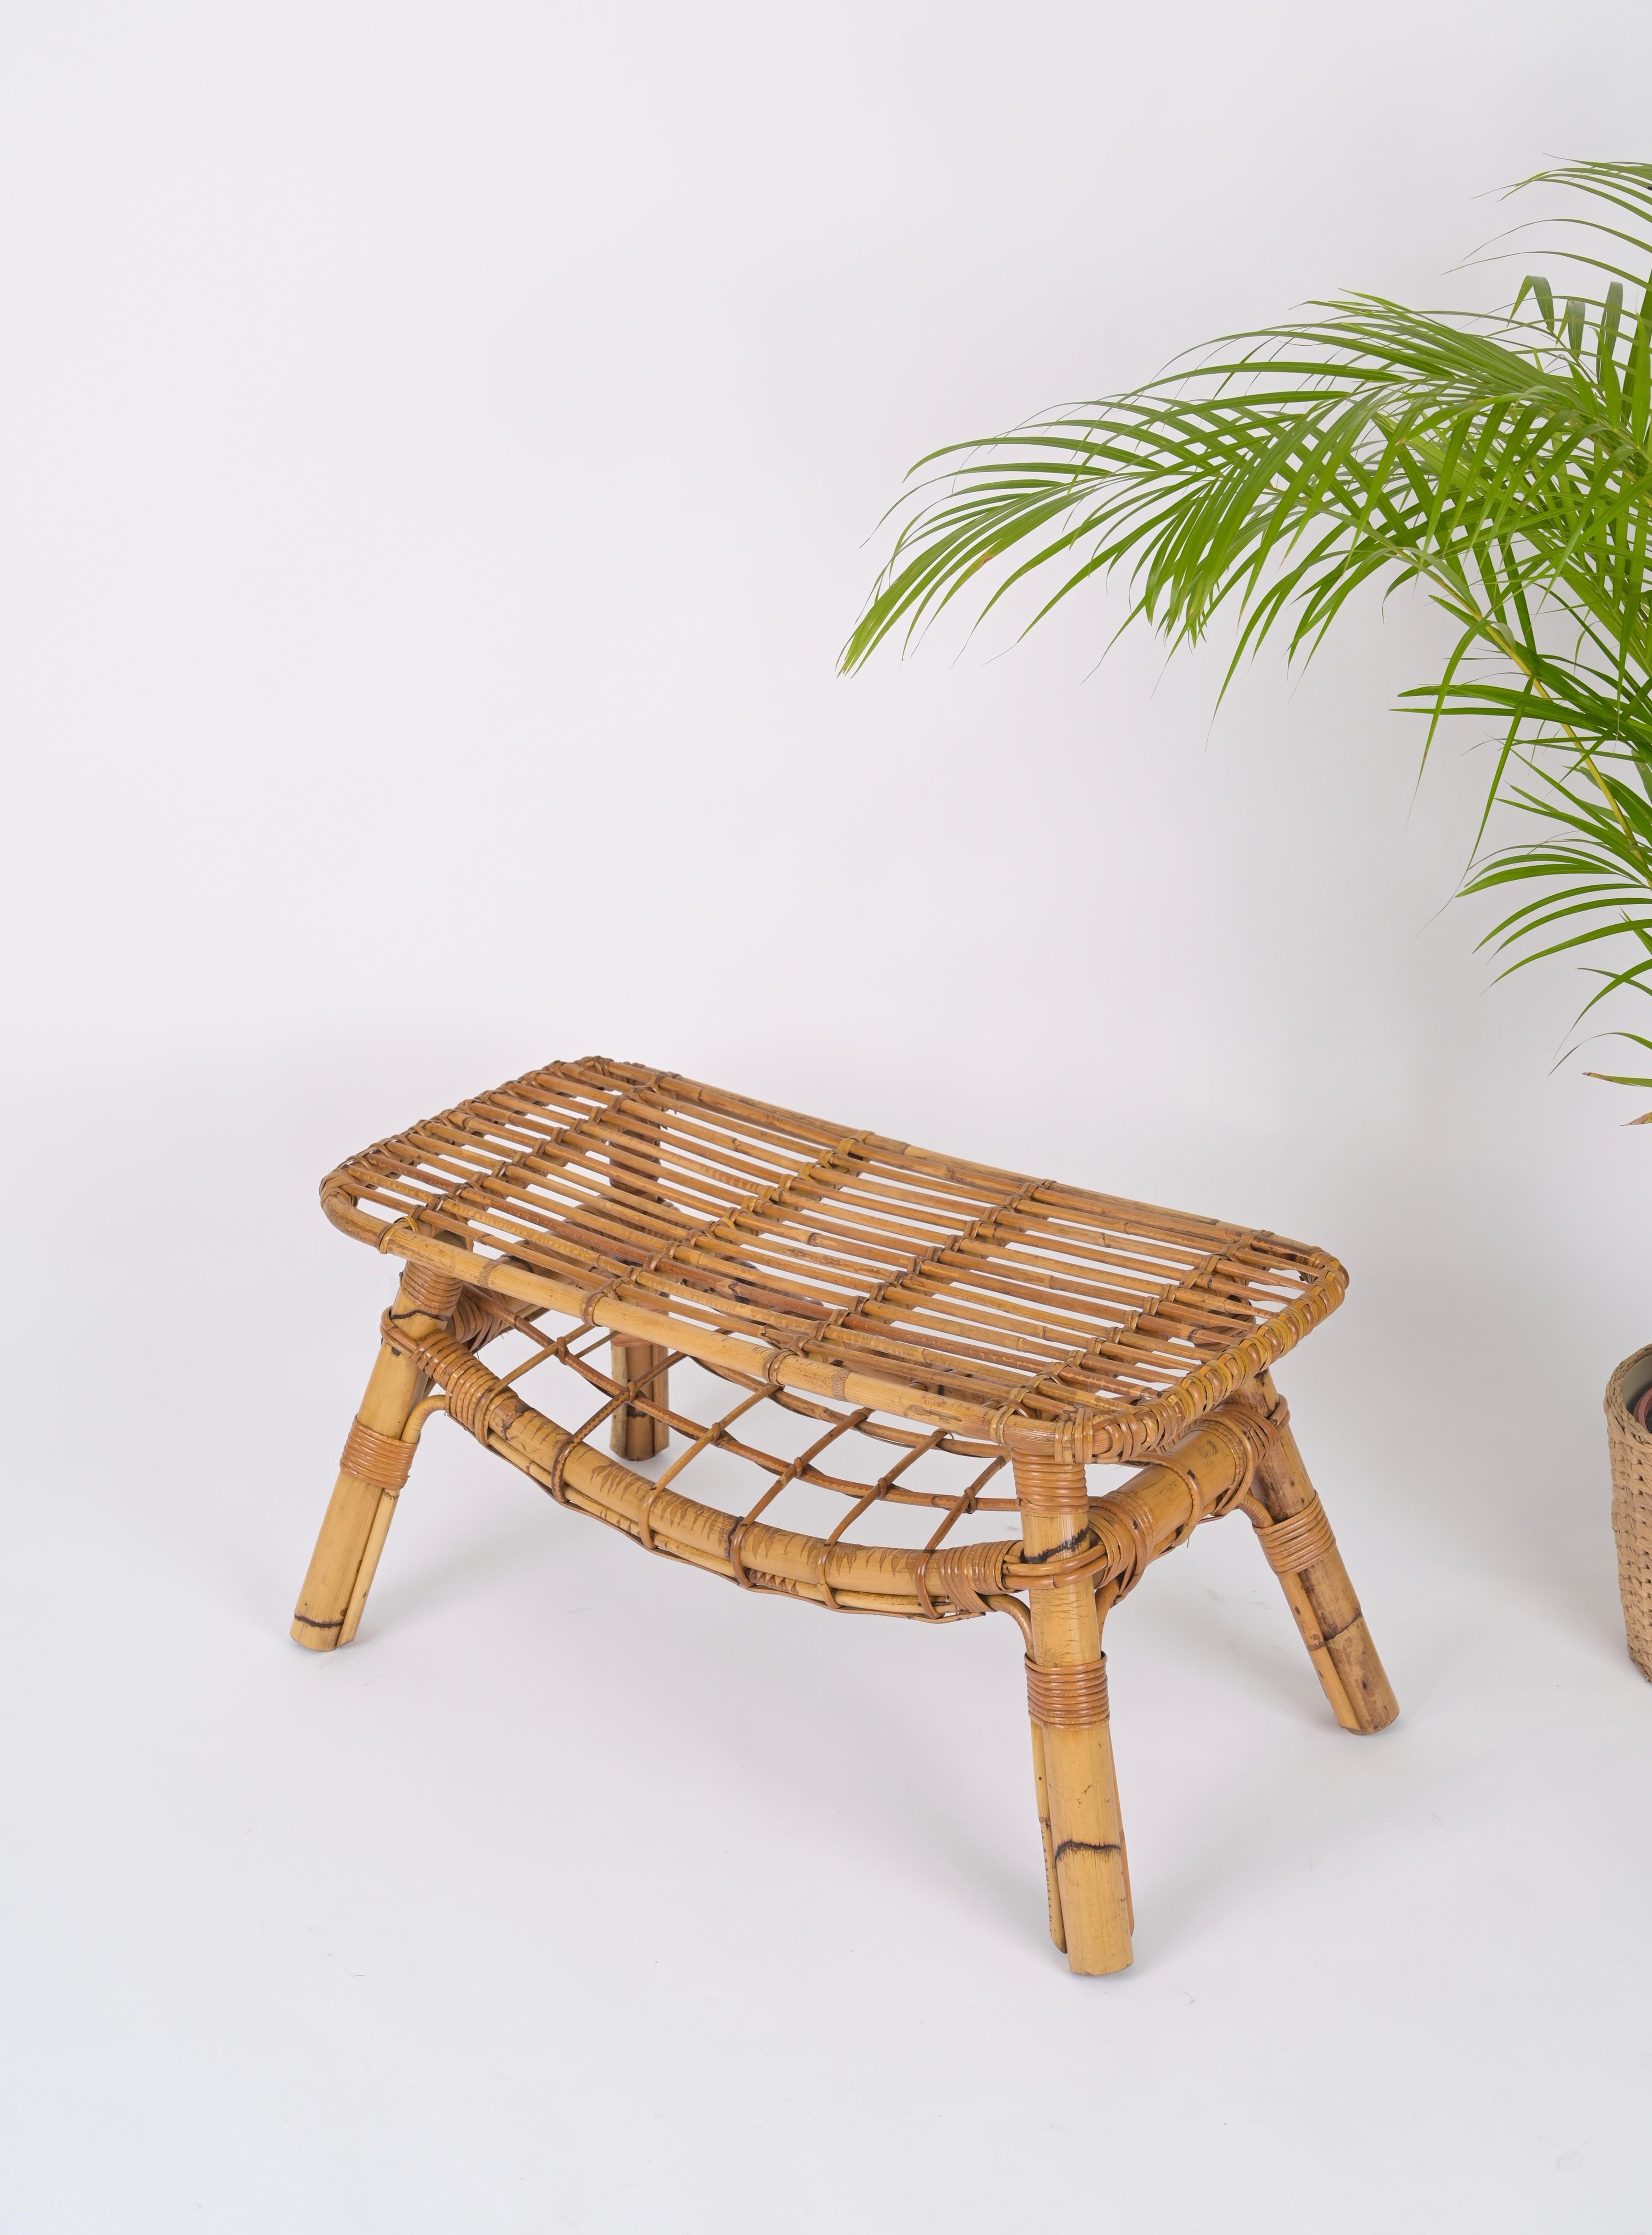 Bamboo Italian Coffee Table or Bench in Rattan and Wicker by Tito Agnoli, 1960s For Sale